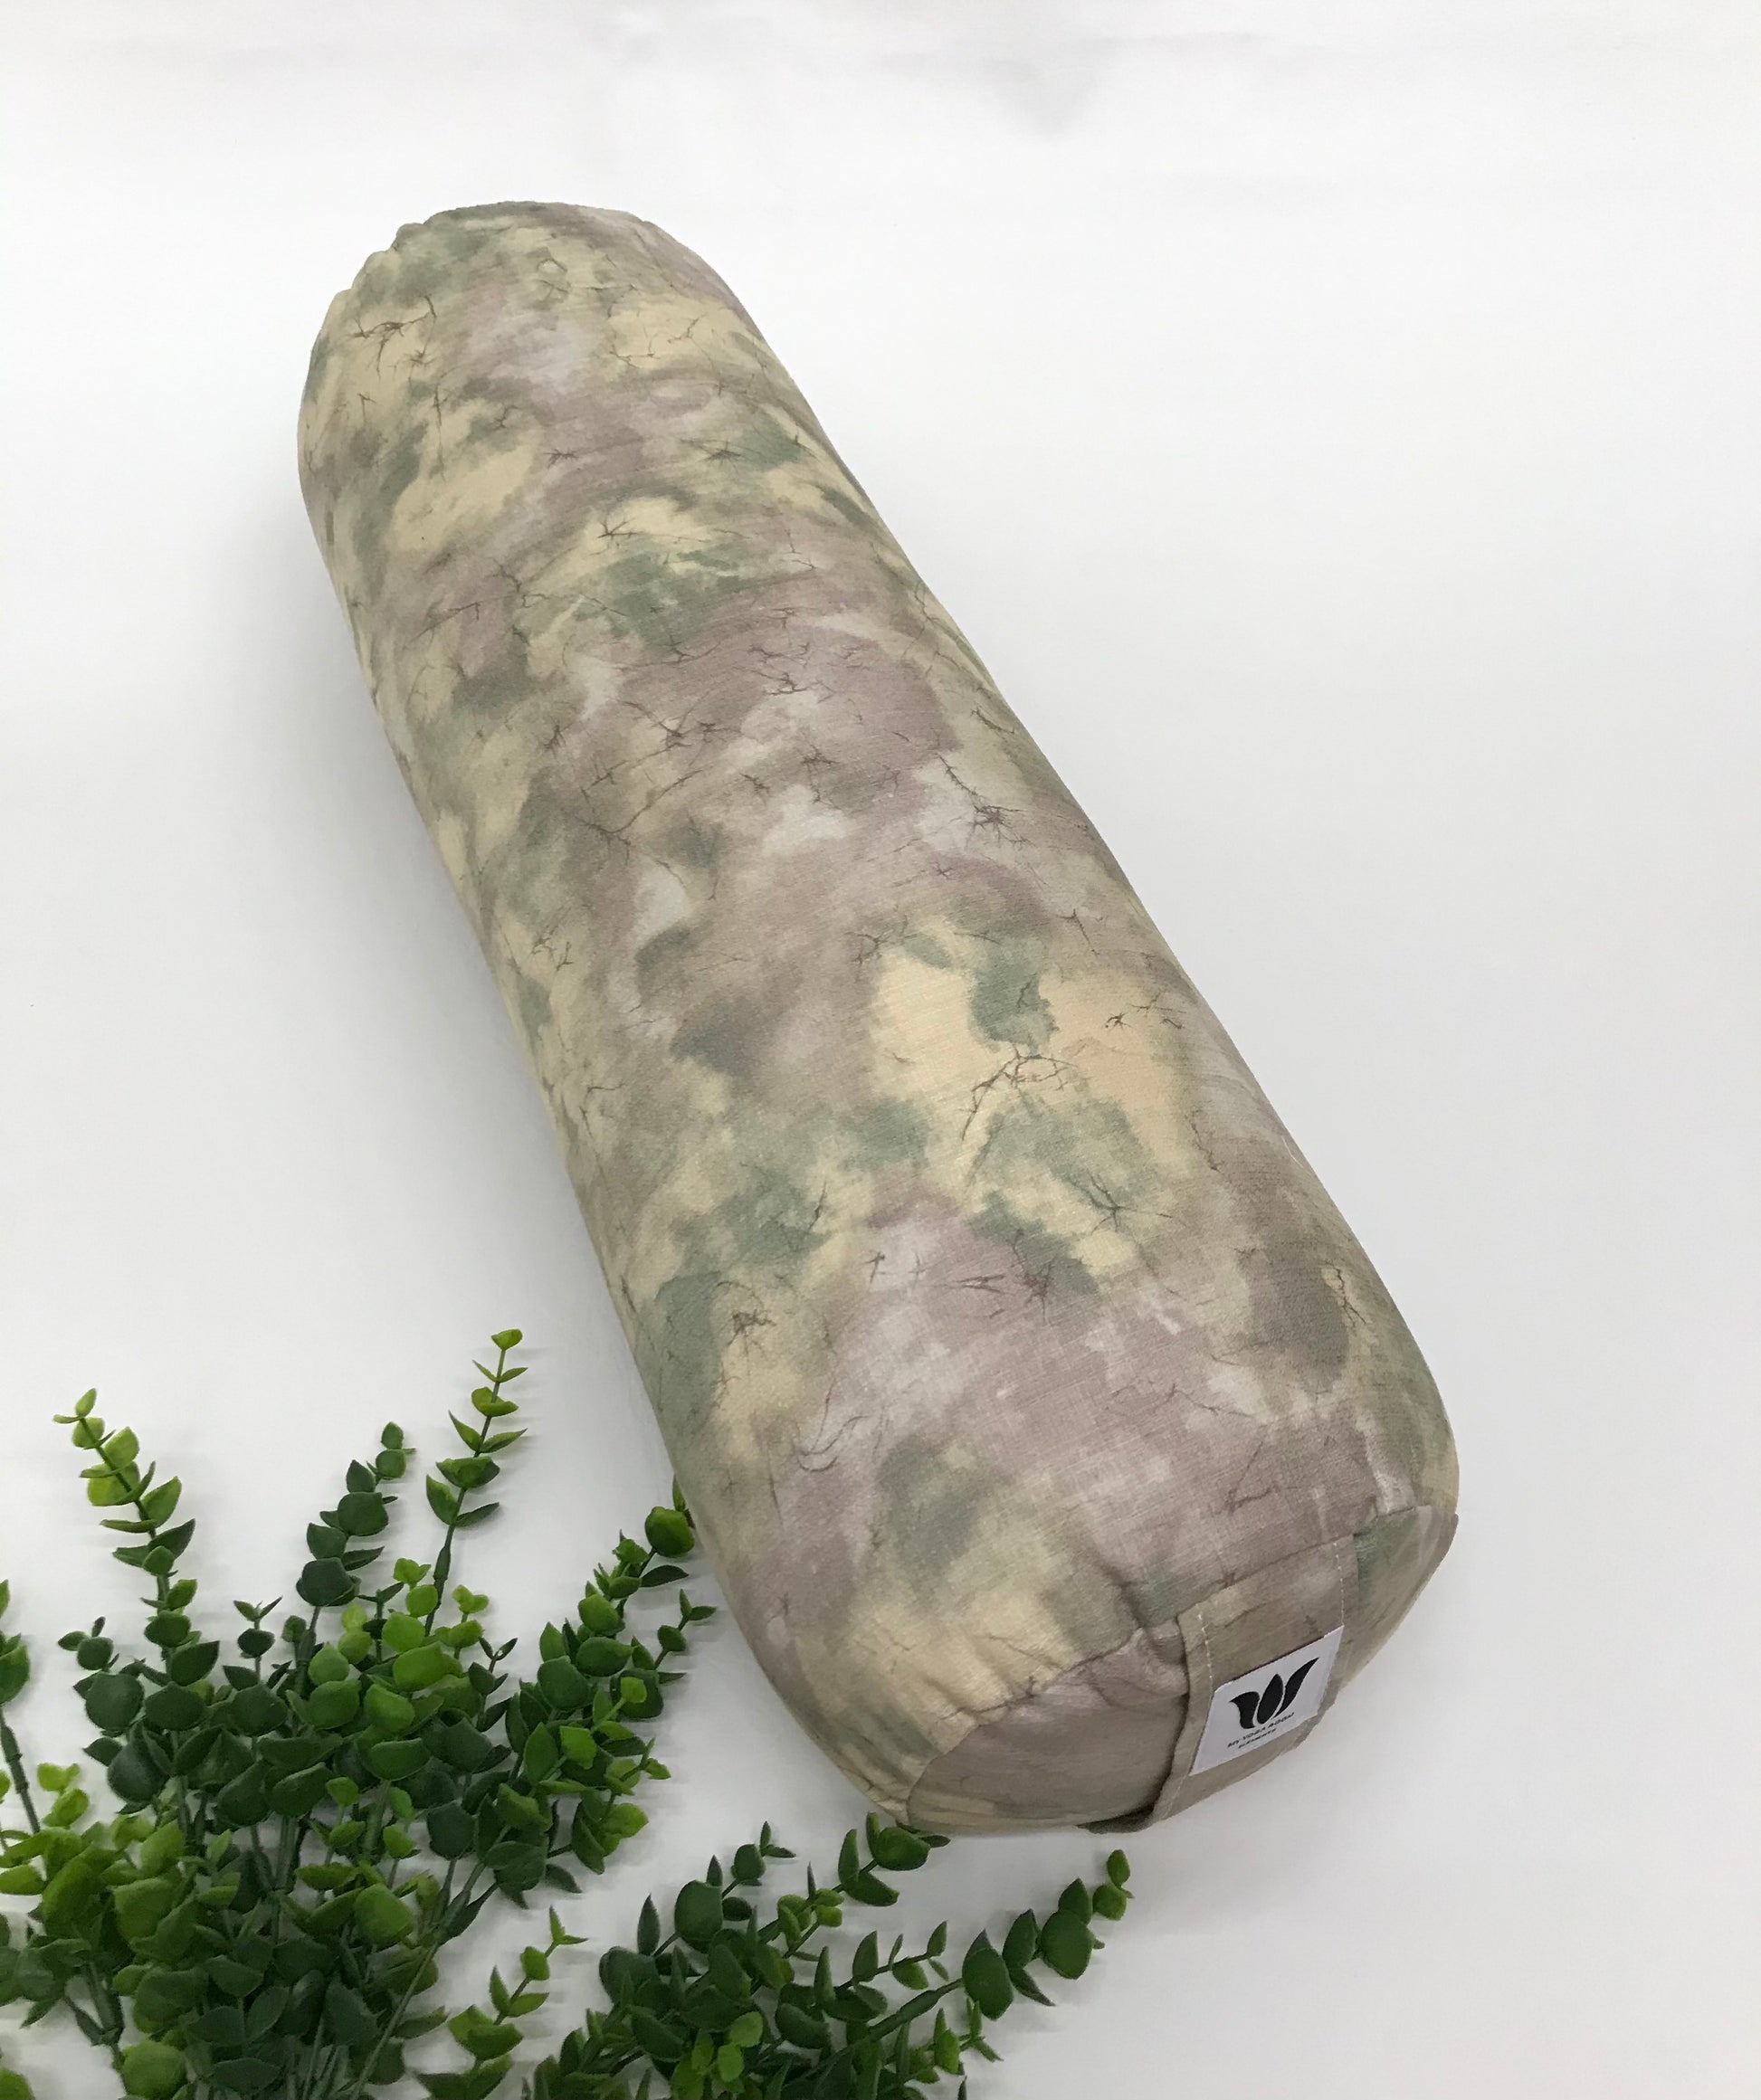 Round yoga bolster in durable poly cotton, in subtle purple marble print fabric. Allergy conscious fill with removeable cover. Made in Canada by My Yoga Room Elements